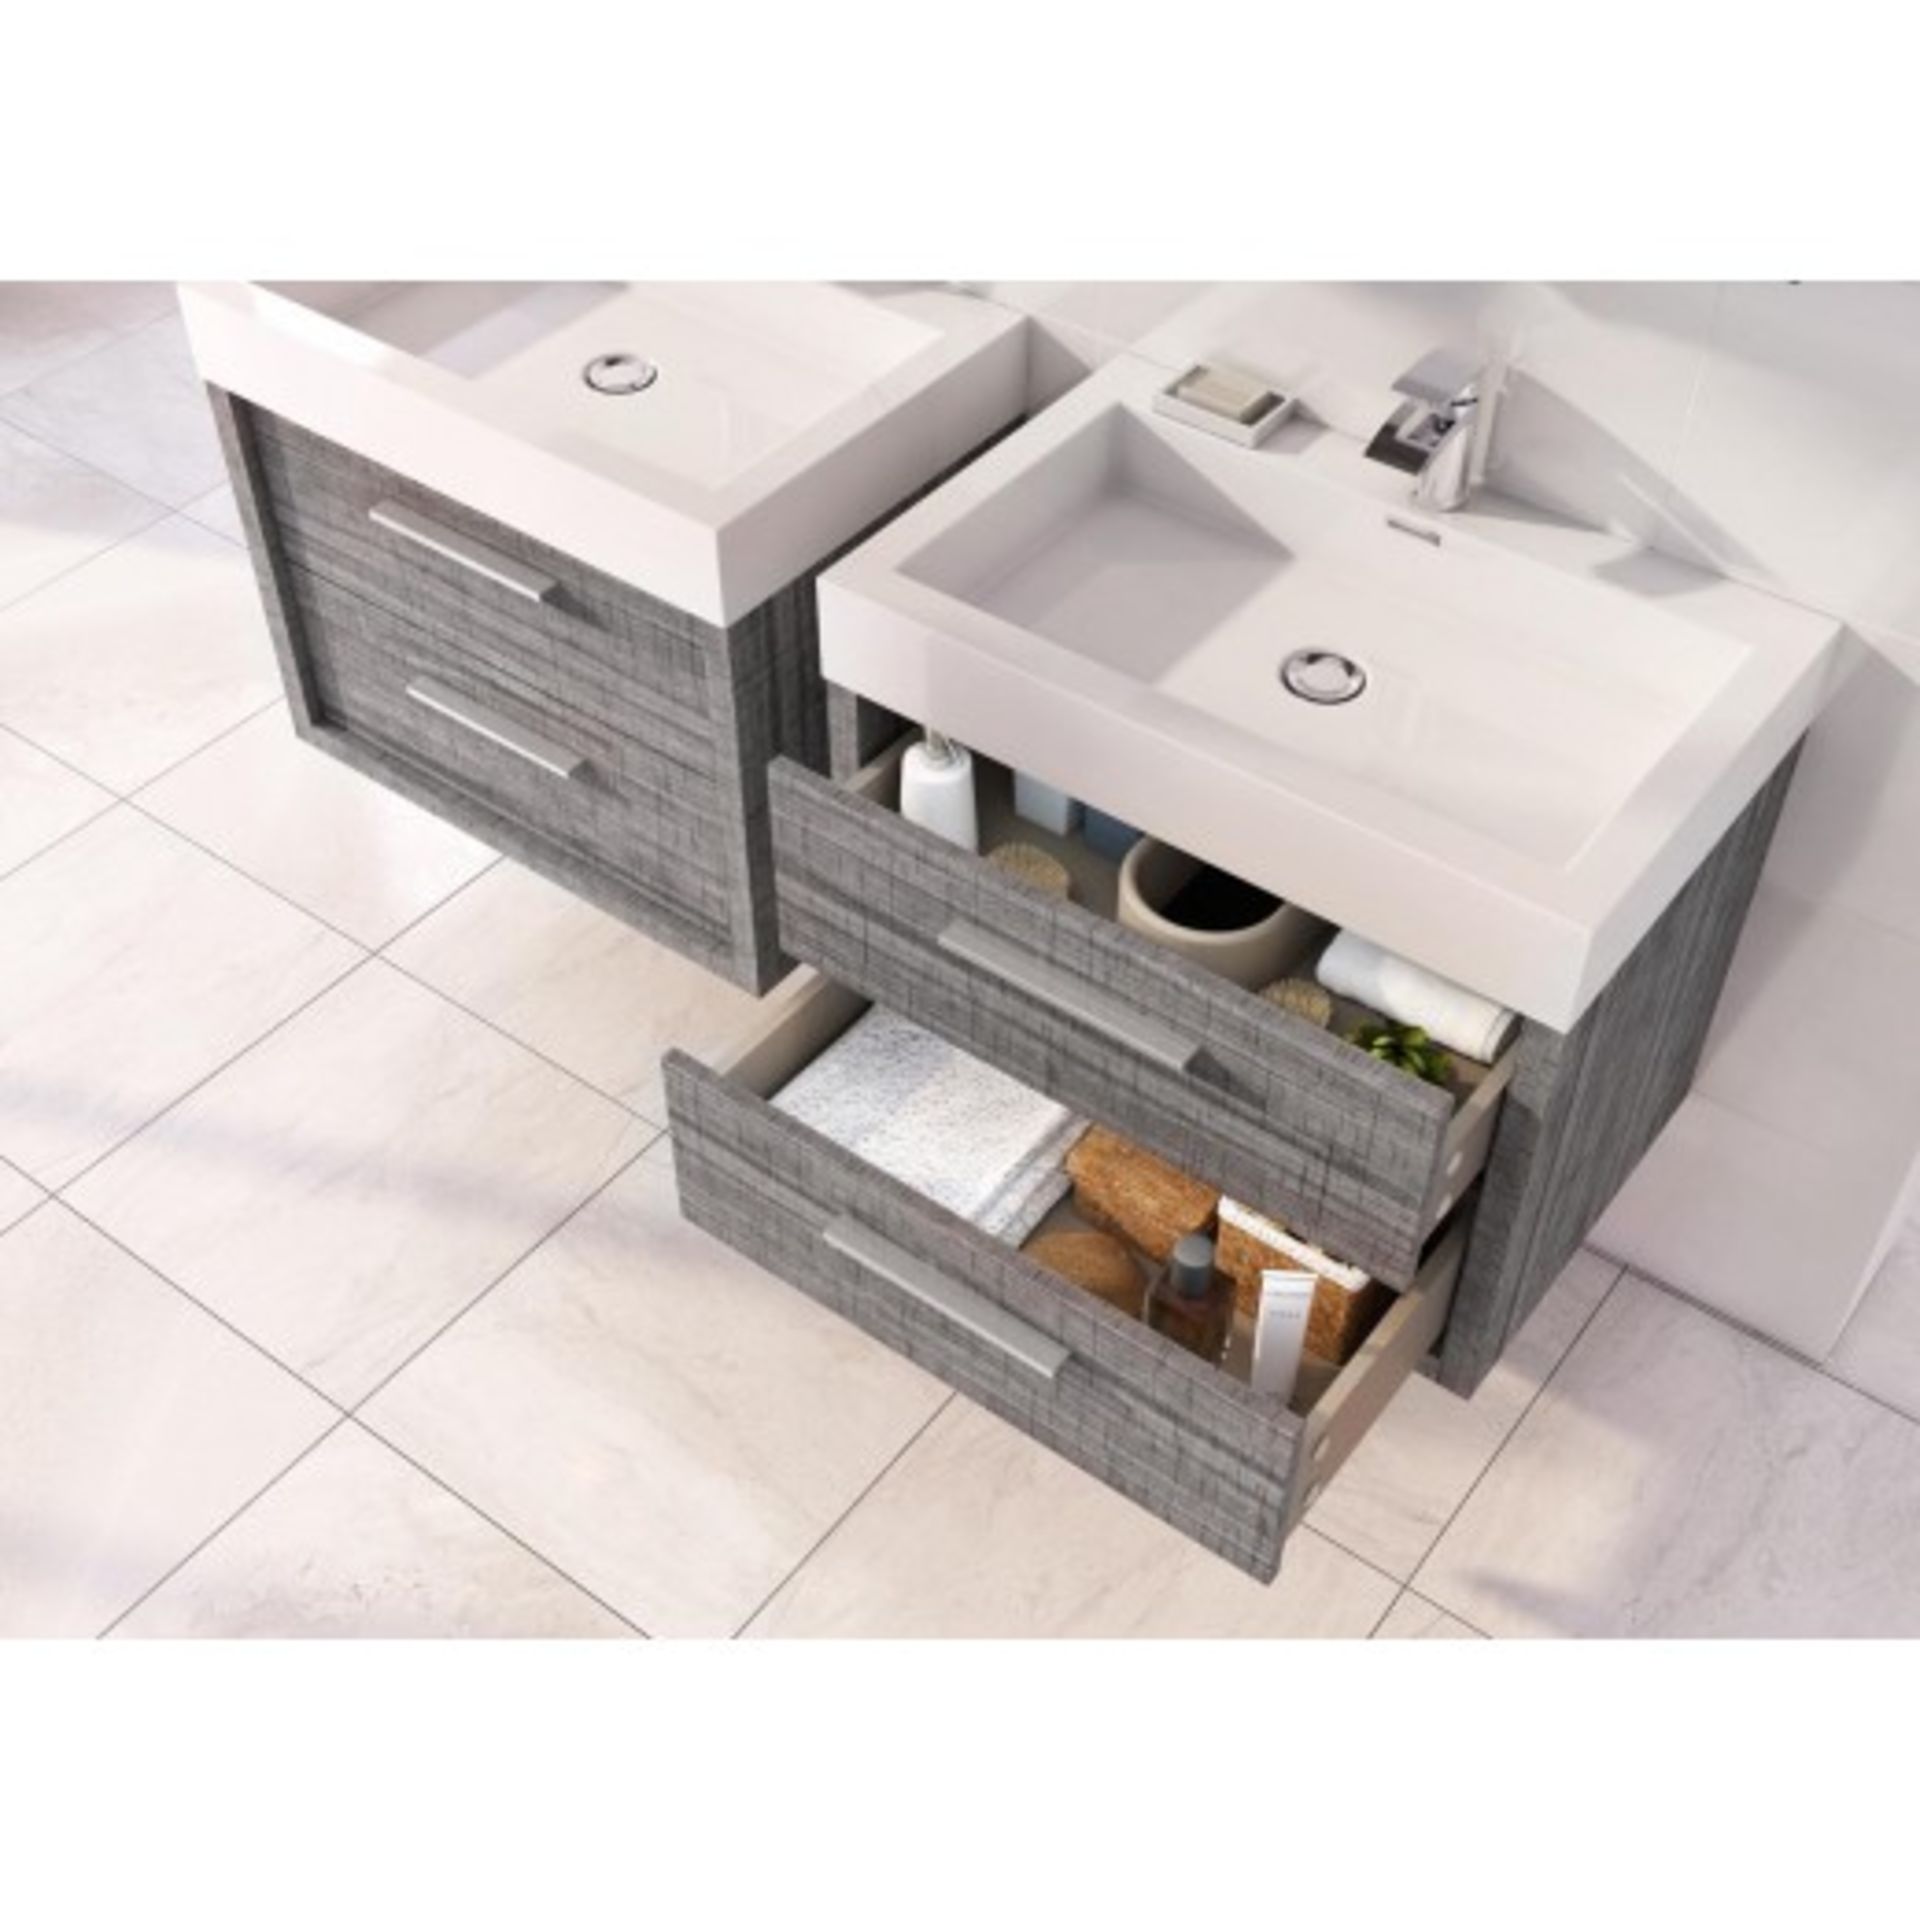 NEW (M57) Winslow 800mm Wall Mounted Vanity Unit & Basin - Grey Ash Effect. RRP £758.00. Comes...